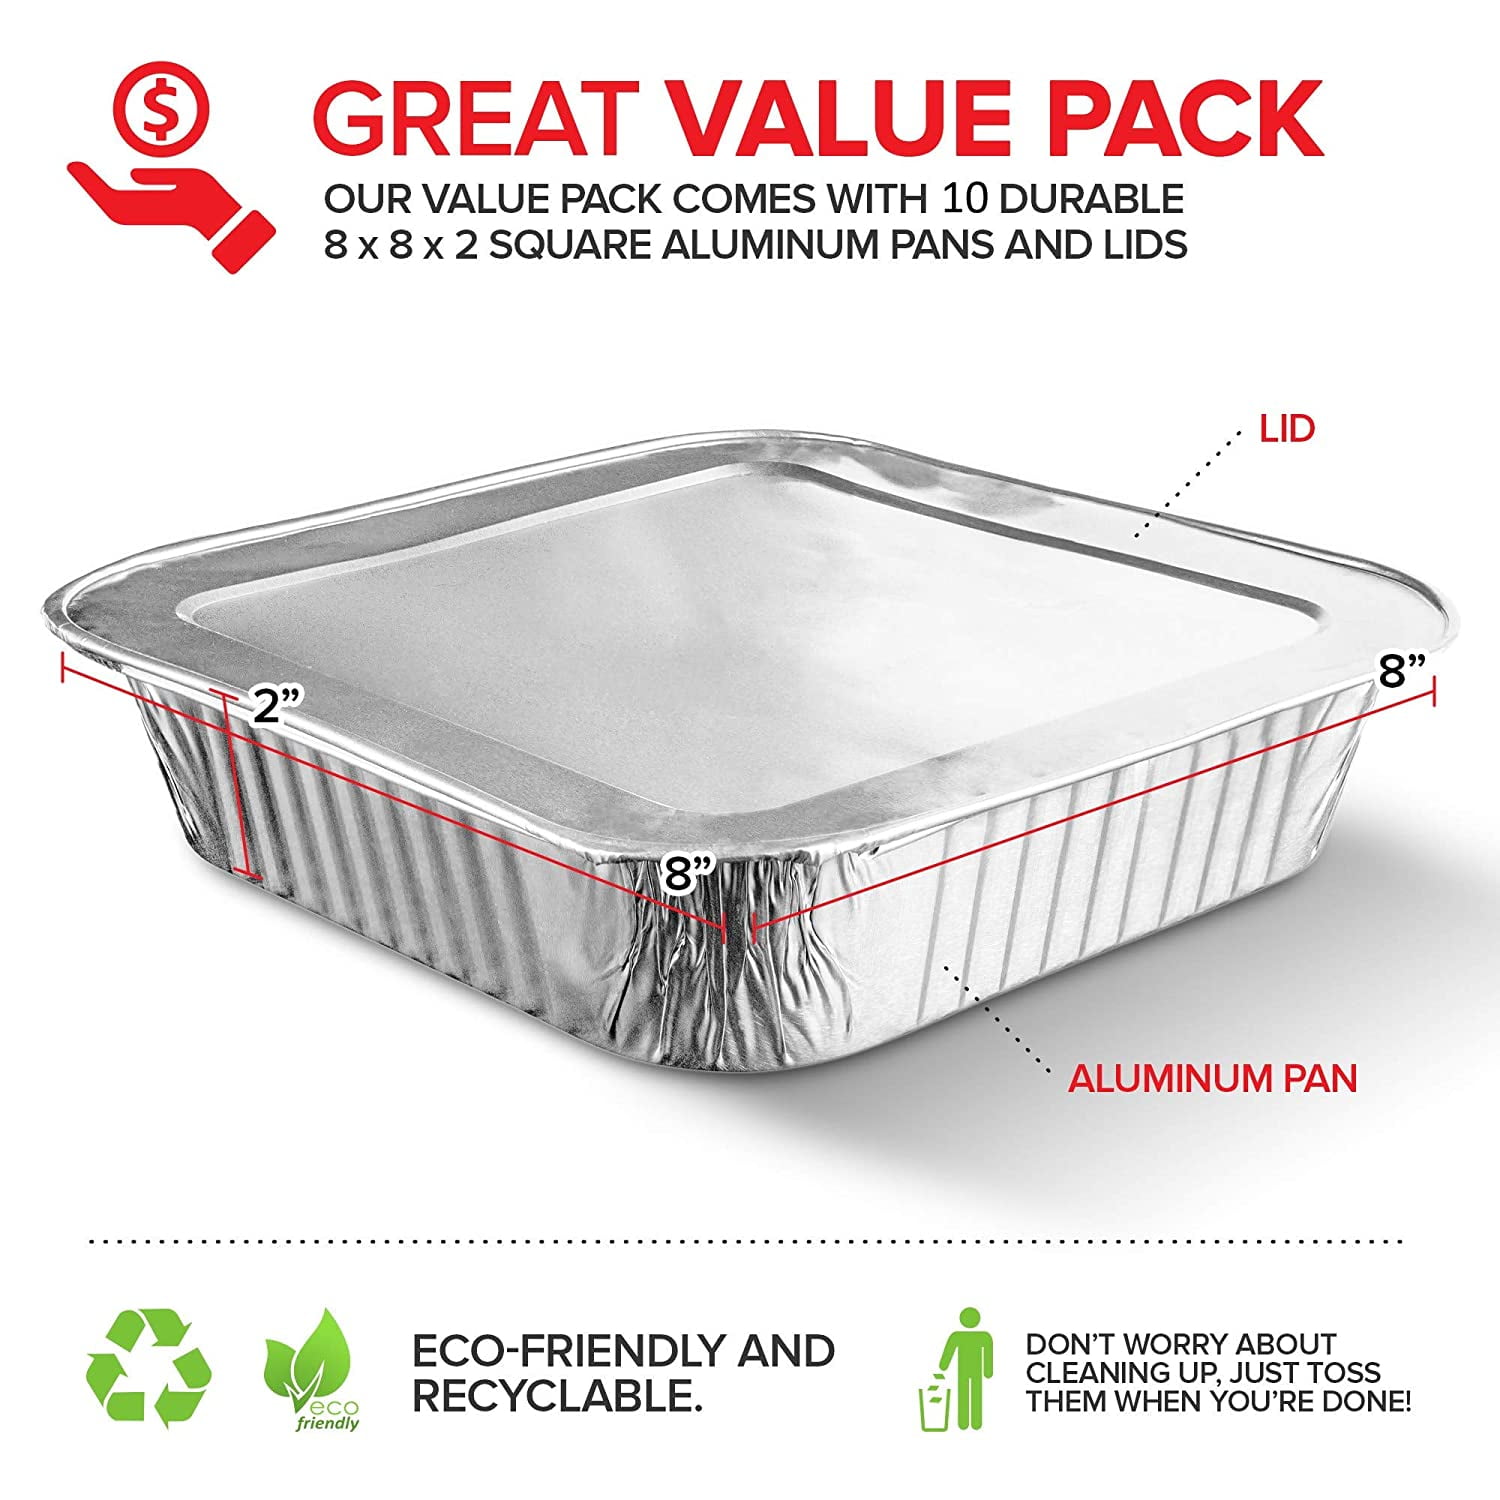 Lsshao Aluminum Pans 8x8 Disposable Foil Pans (25 Pack) - 8 inch Square Baking Cake Pans - Tin Foil Pans Food Containers Great for Cooking, Heating